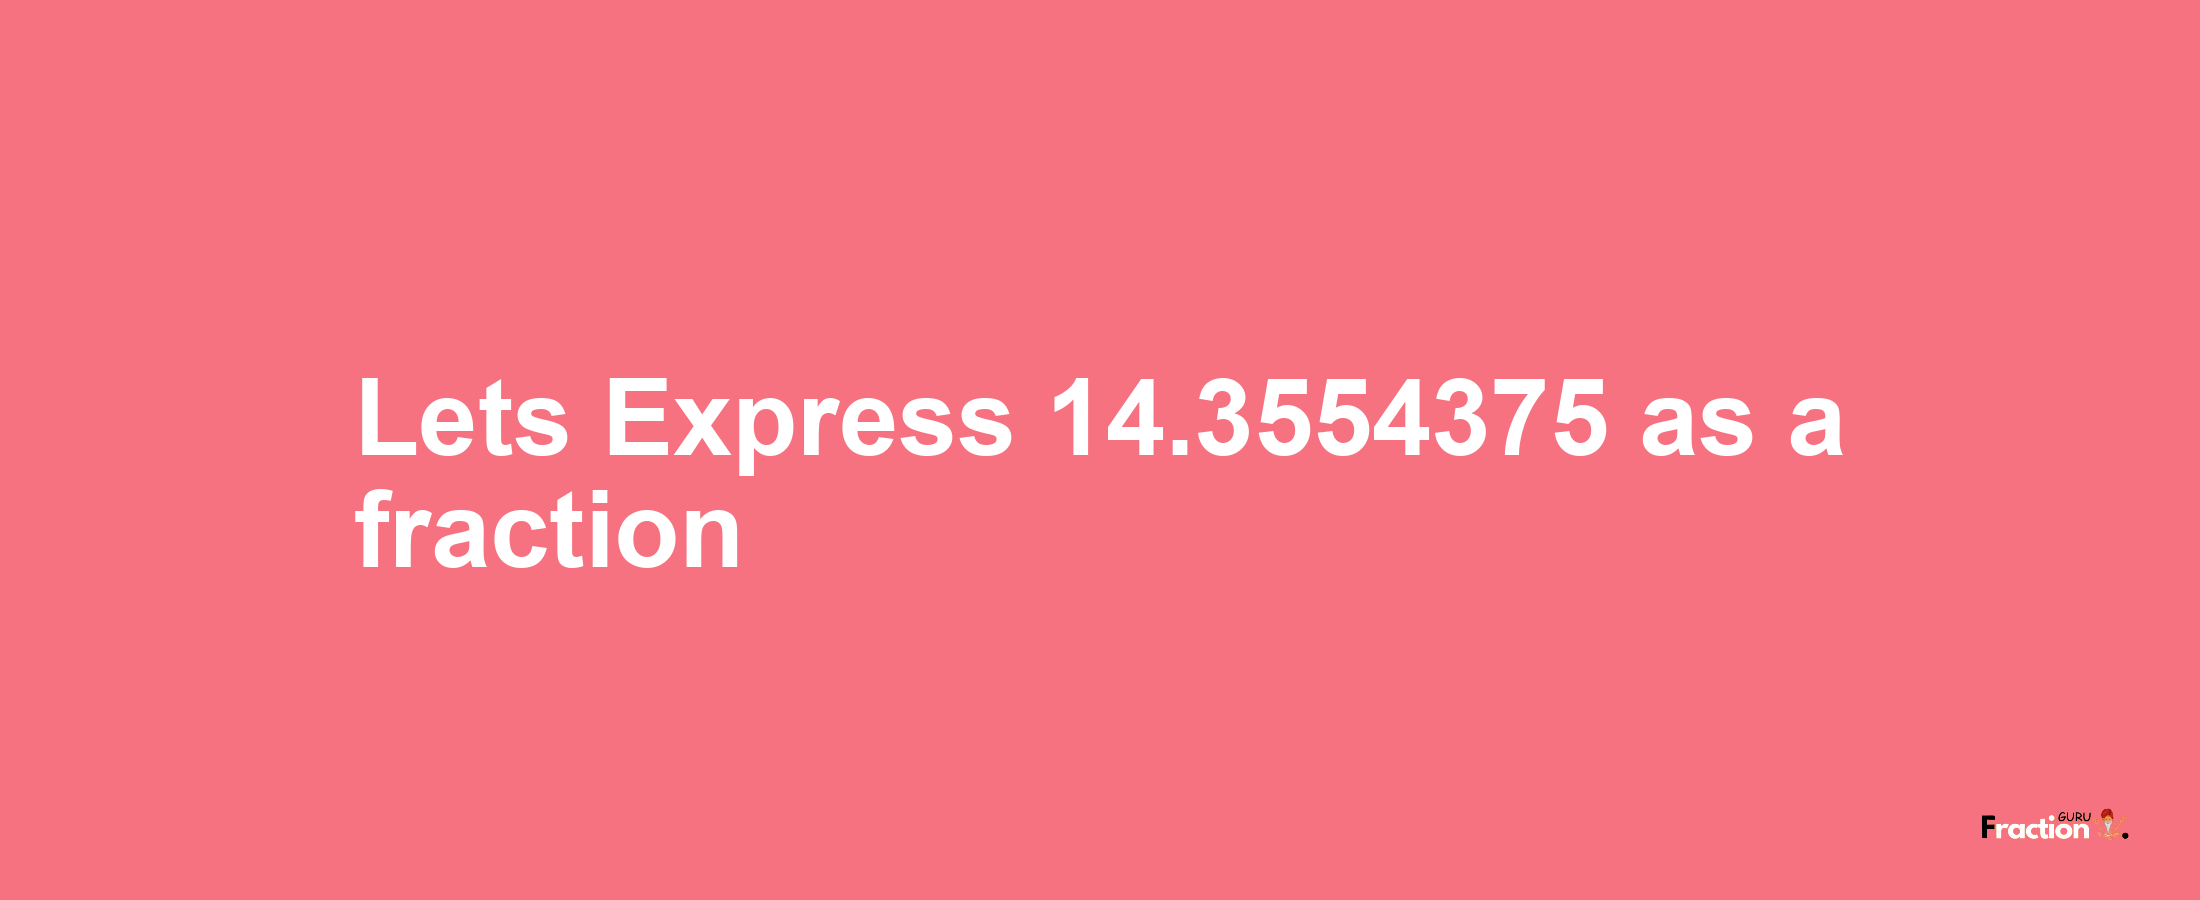 Lets Express 14.3554375 as afraction